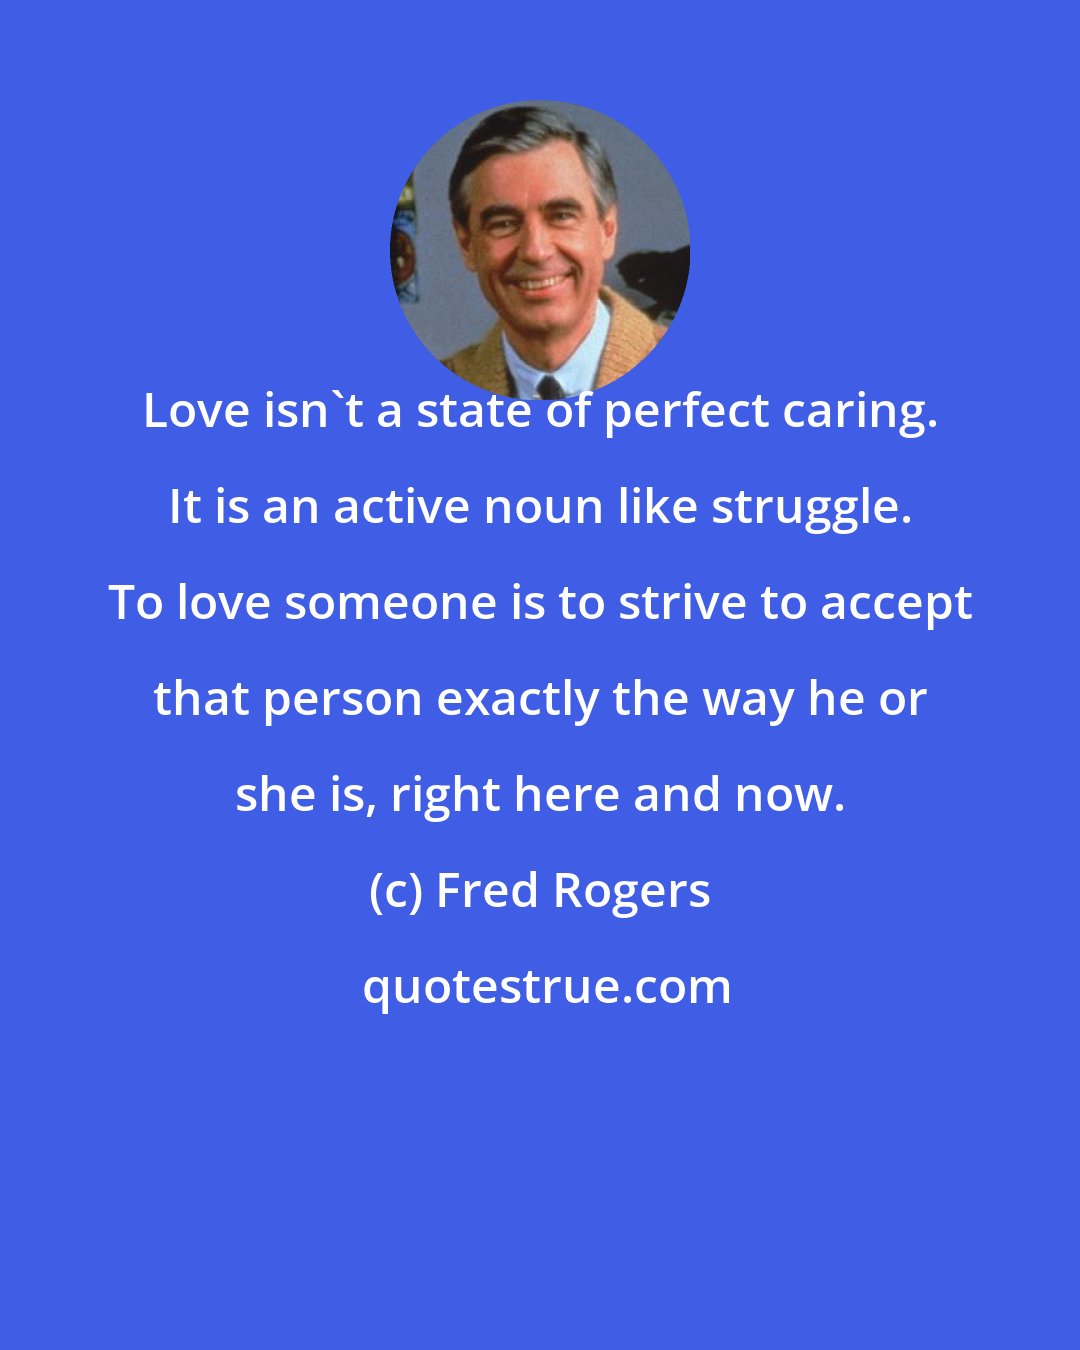 Fred Rogers: Love isn't a state of perfect caring. It is an active noun like struggle. To love someone is to strive to accept that person exactly the way he or she is, right here and now.